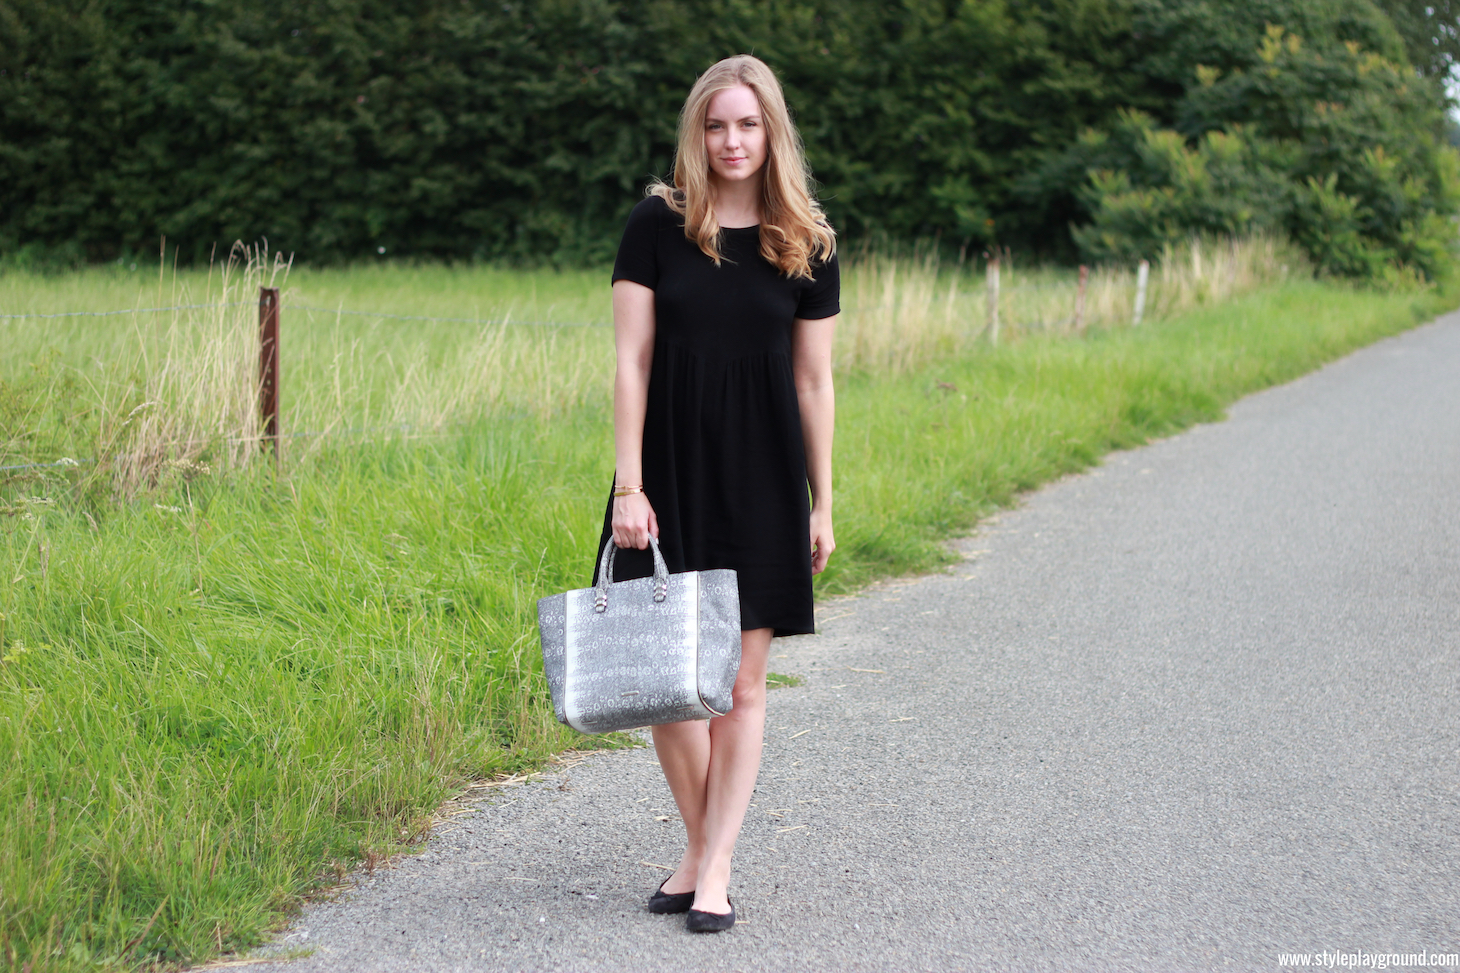 Axelle Blanpain of Style playground is wearing a Bash dress, Rebecca Minkoff mini Perry tote, H&M flats, Cartier love bracelet & Tiffany T bracelet